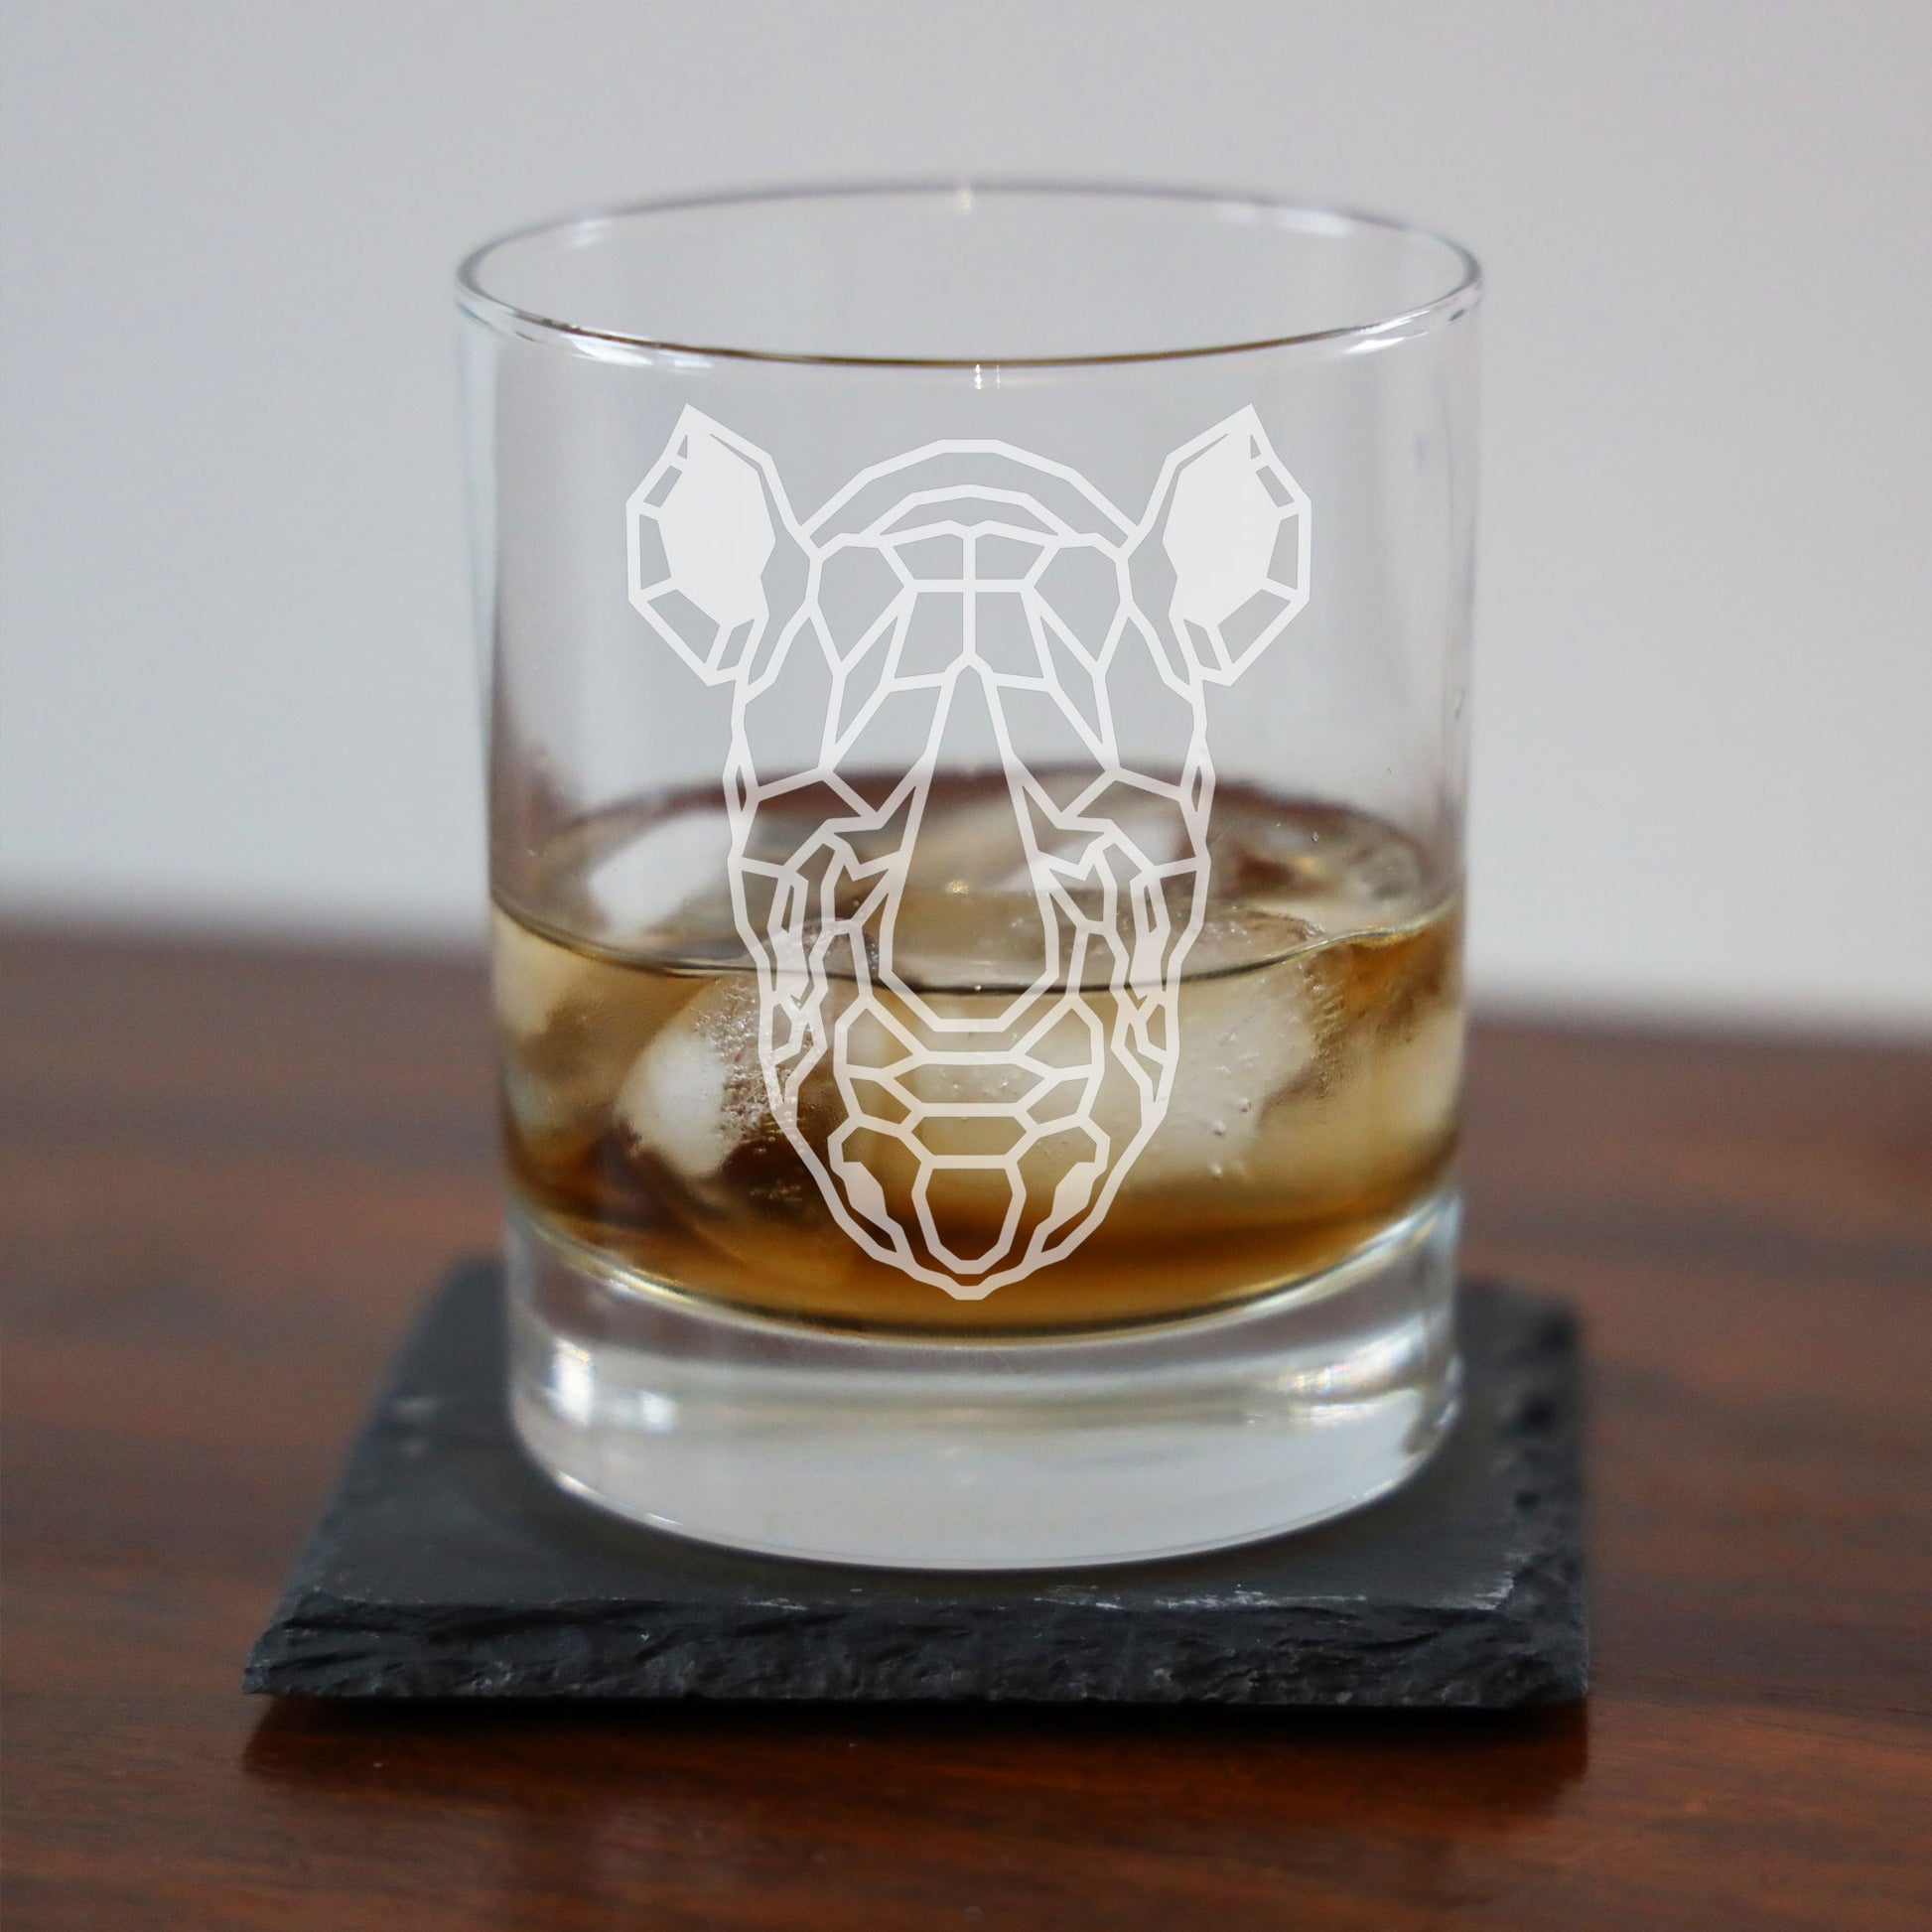 Rhino Engraved Whisky Glass  - Always Looking Good -   